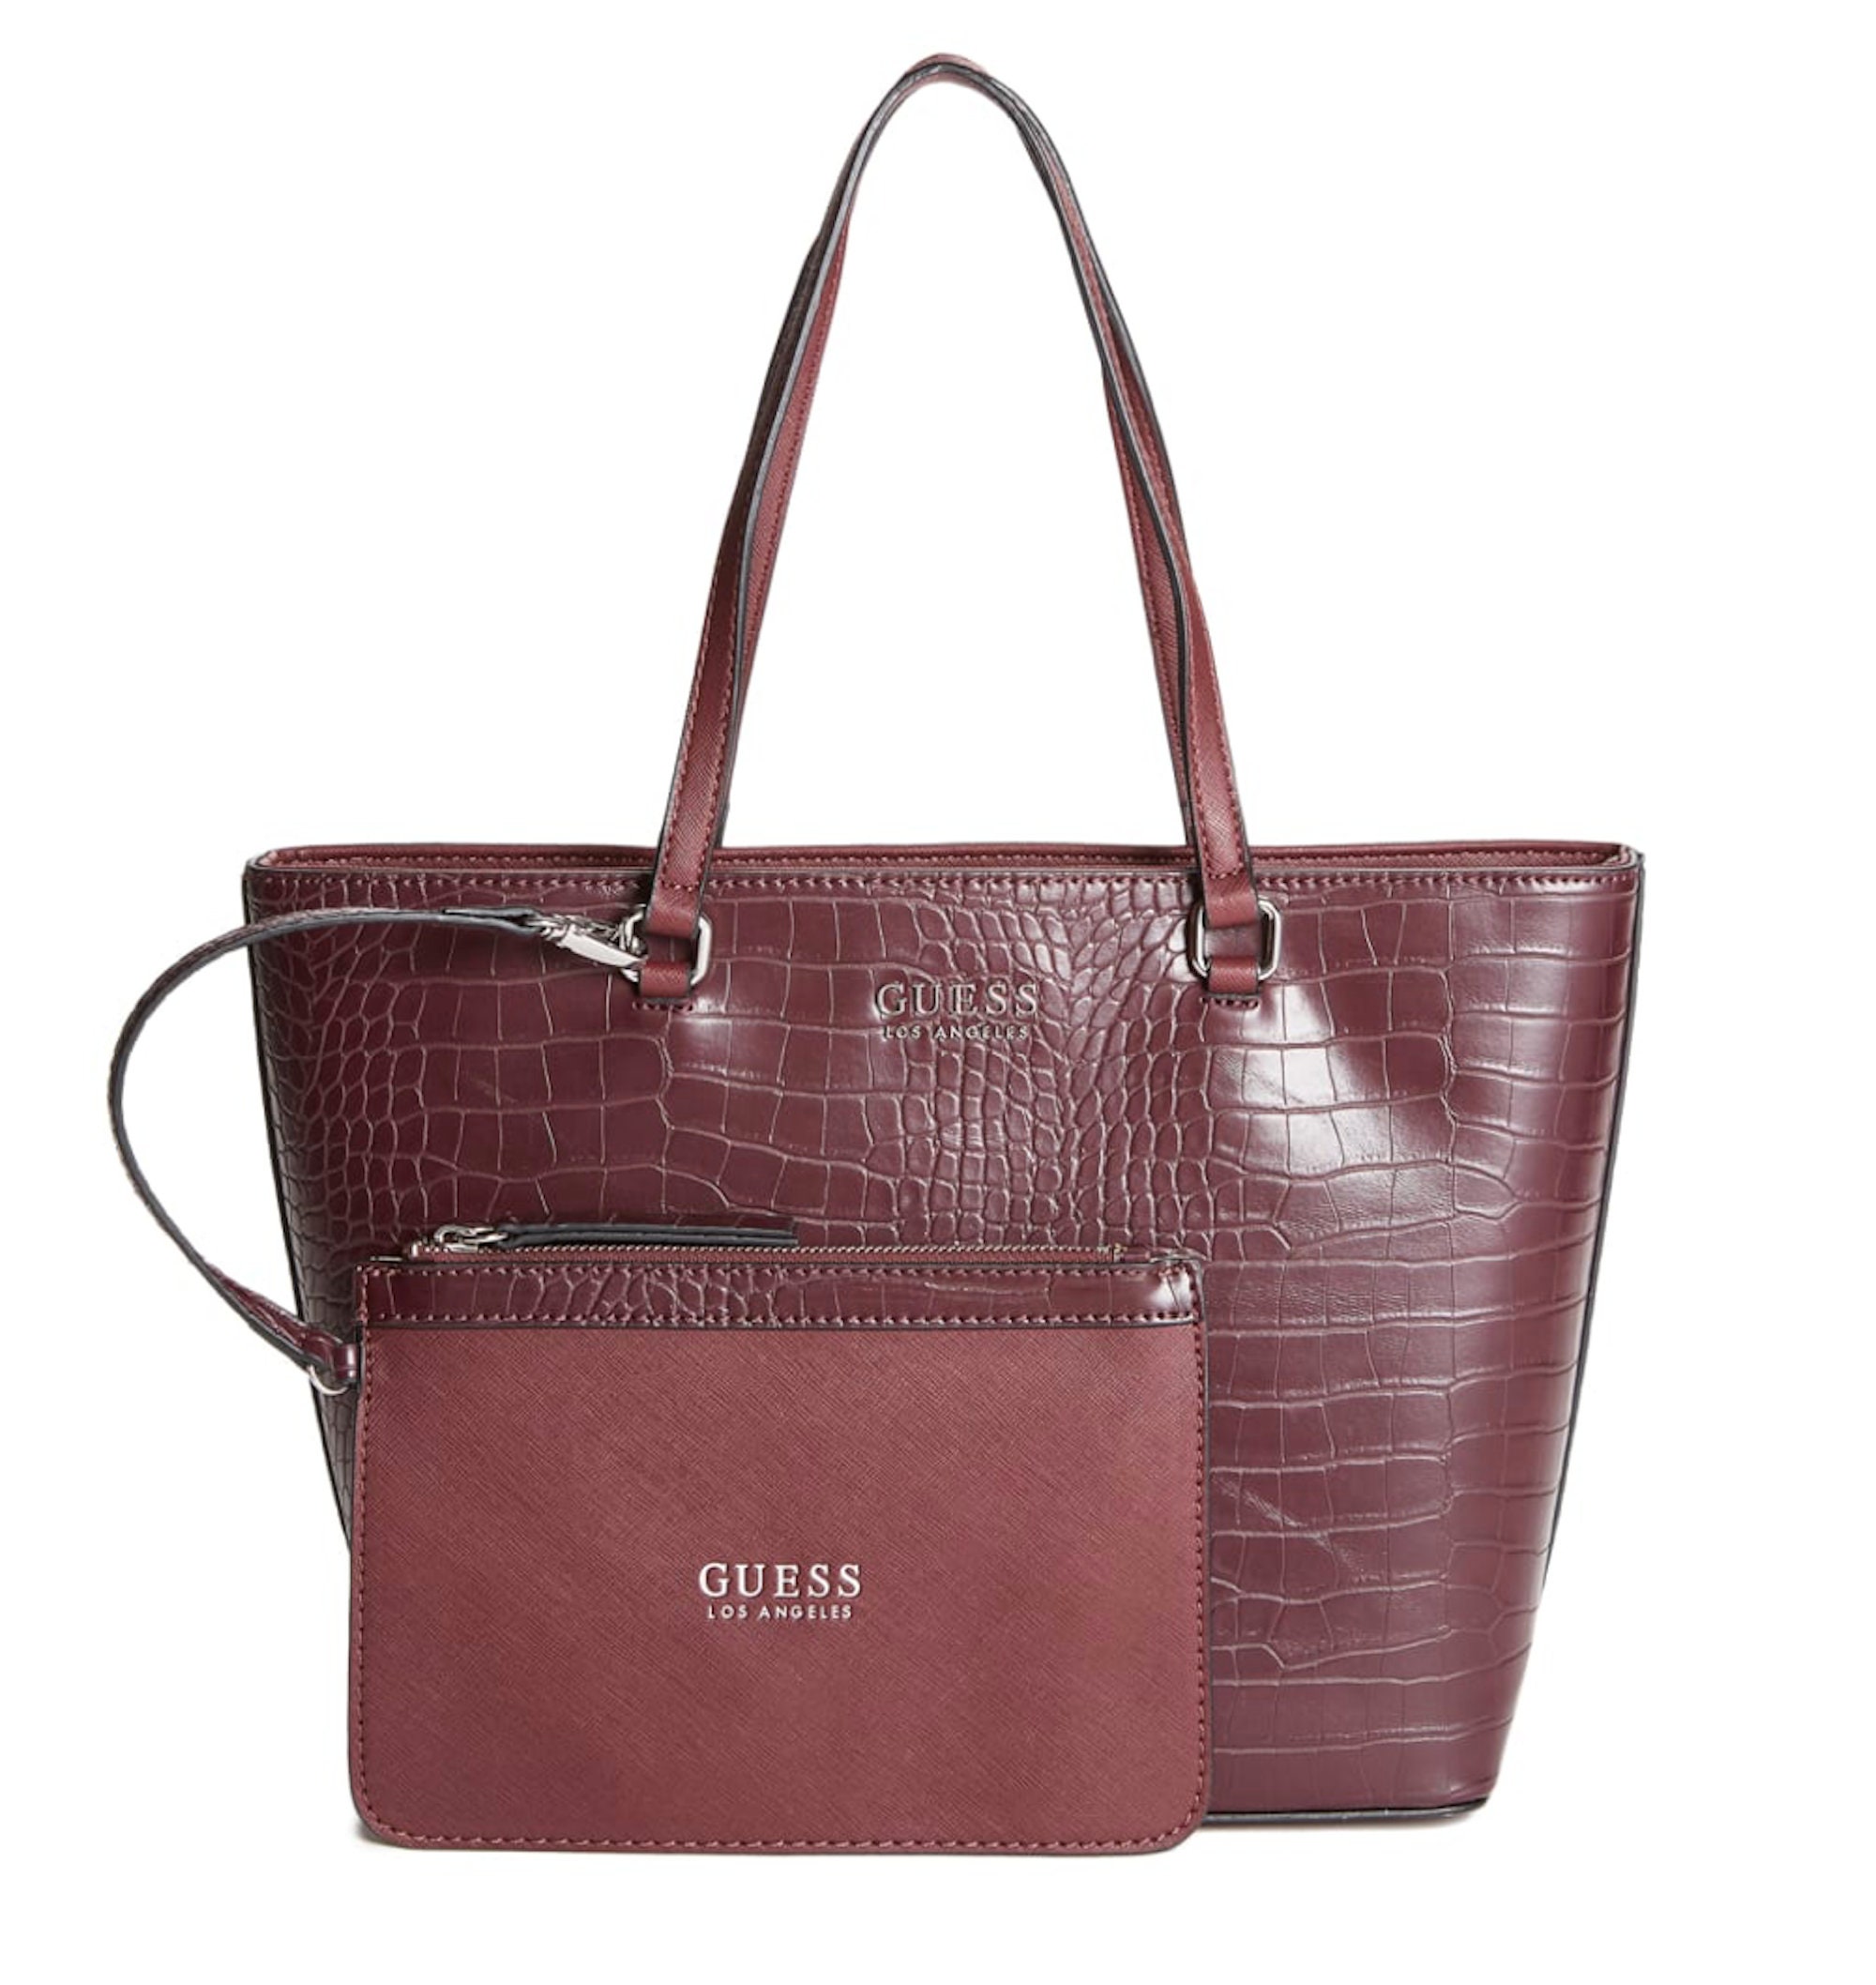 Original Guess tote bag 💕 - Legal Scents and Accessories